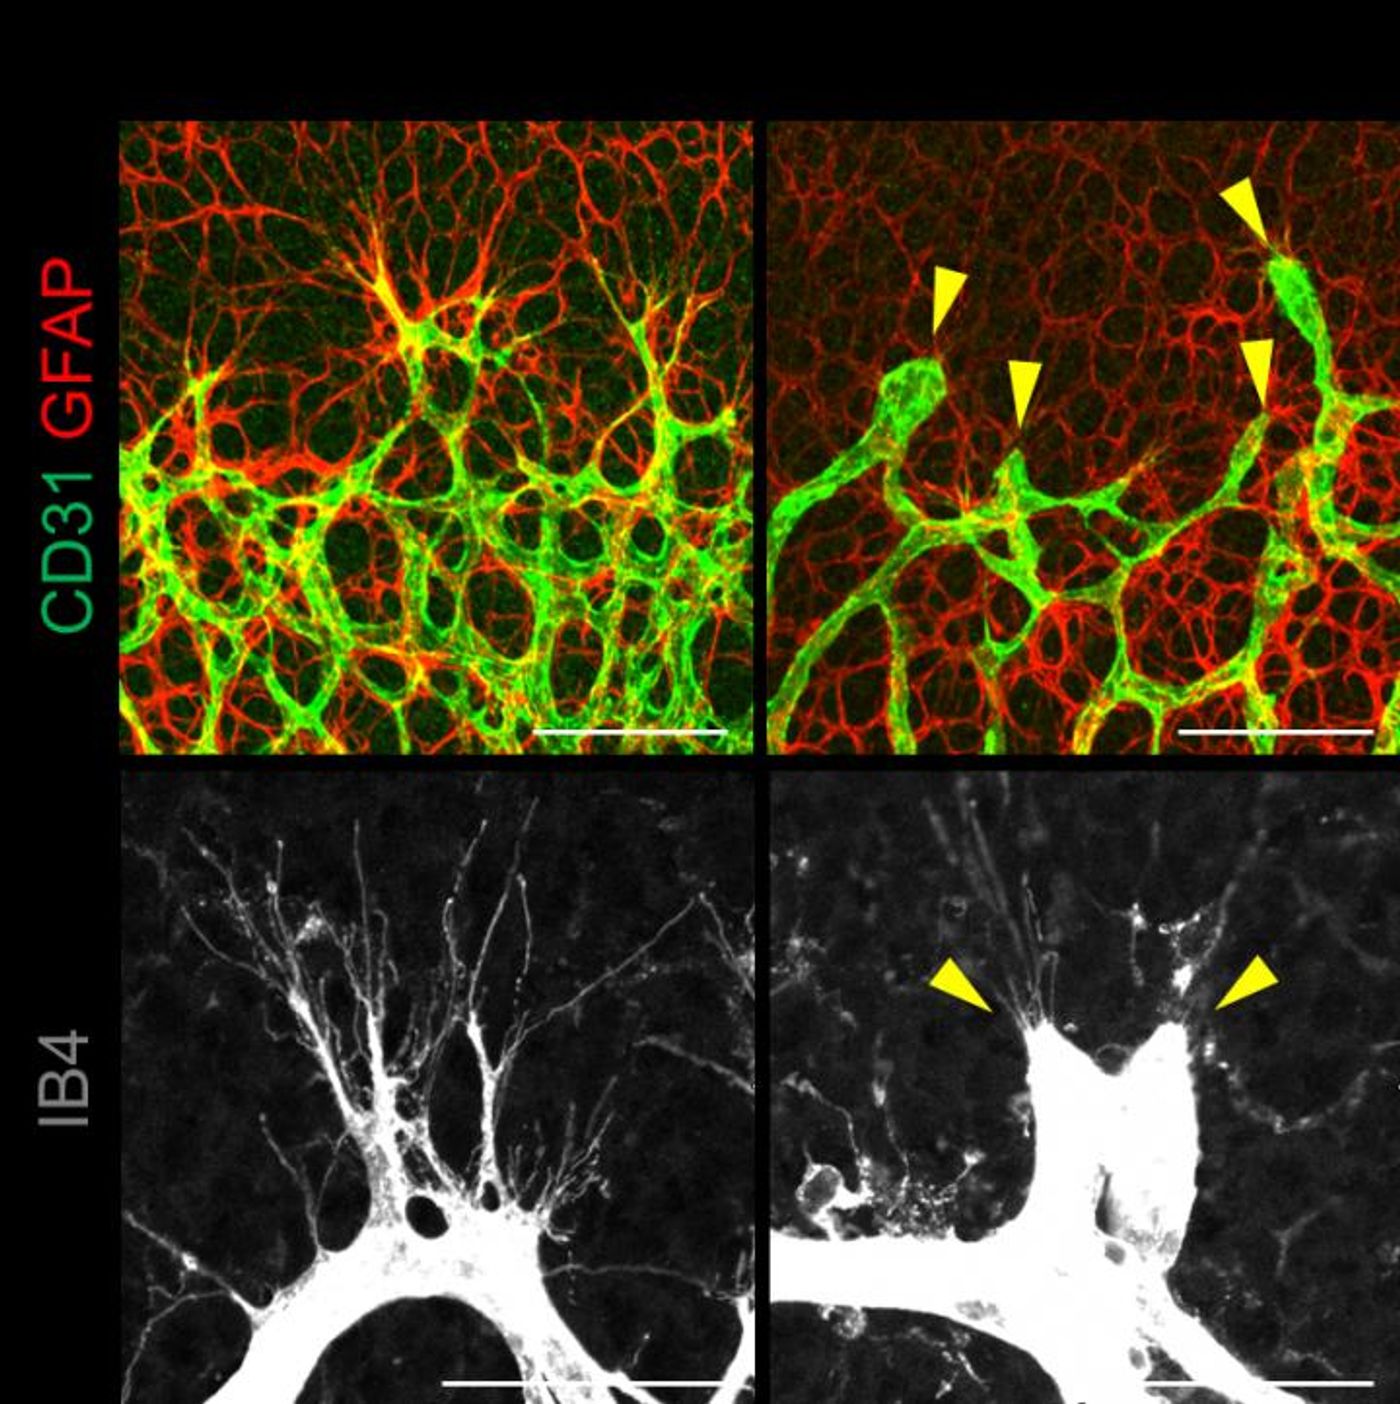 New blood vessels branch out of the main one like thin extensions (right). Normal tissue (right) is compared with tissue lacking YAP/TAZ (left), where the pruned-looking branching are not able to develop. Credit: IBS